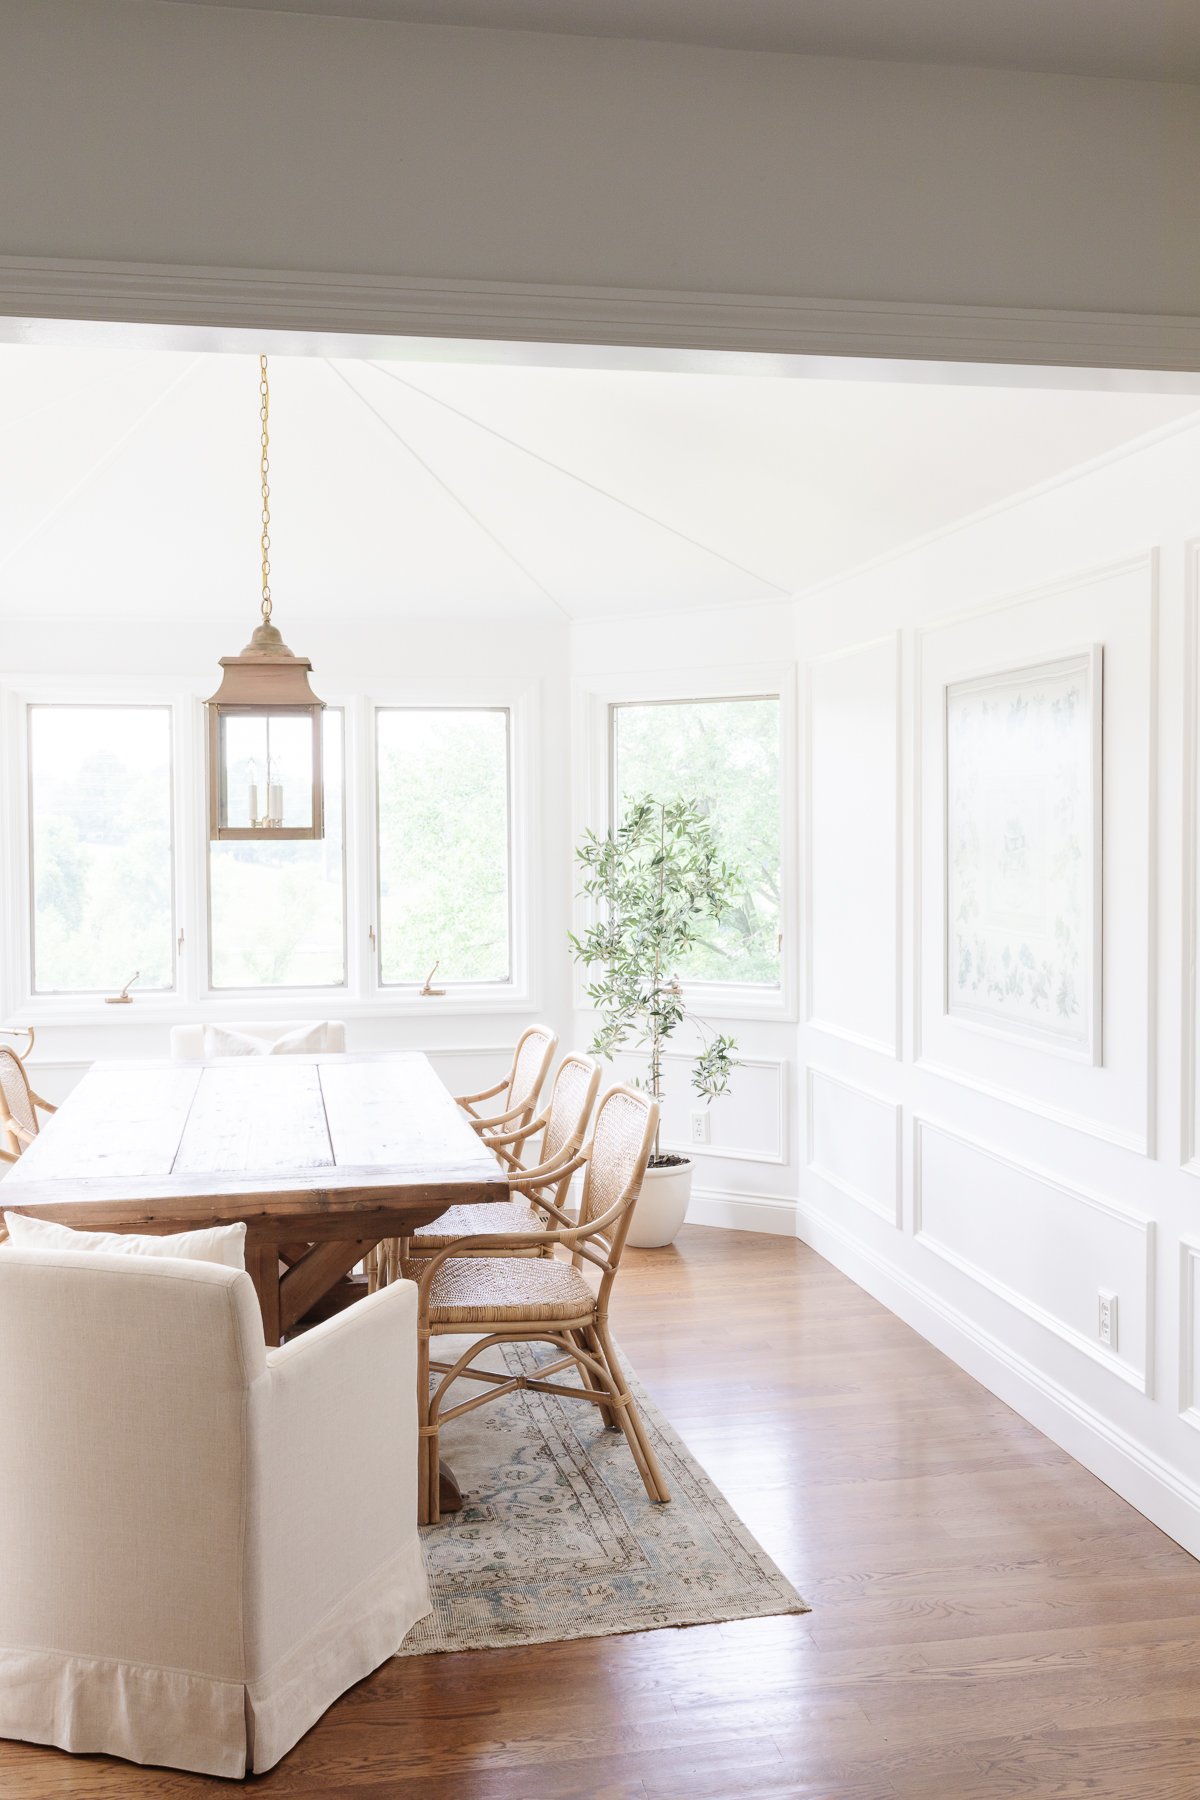 A white windowed breakfast nook with a wood dining table.